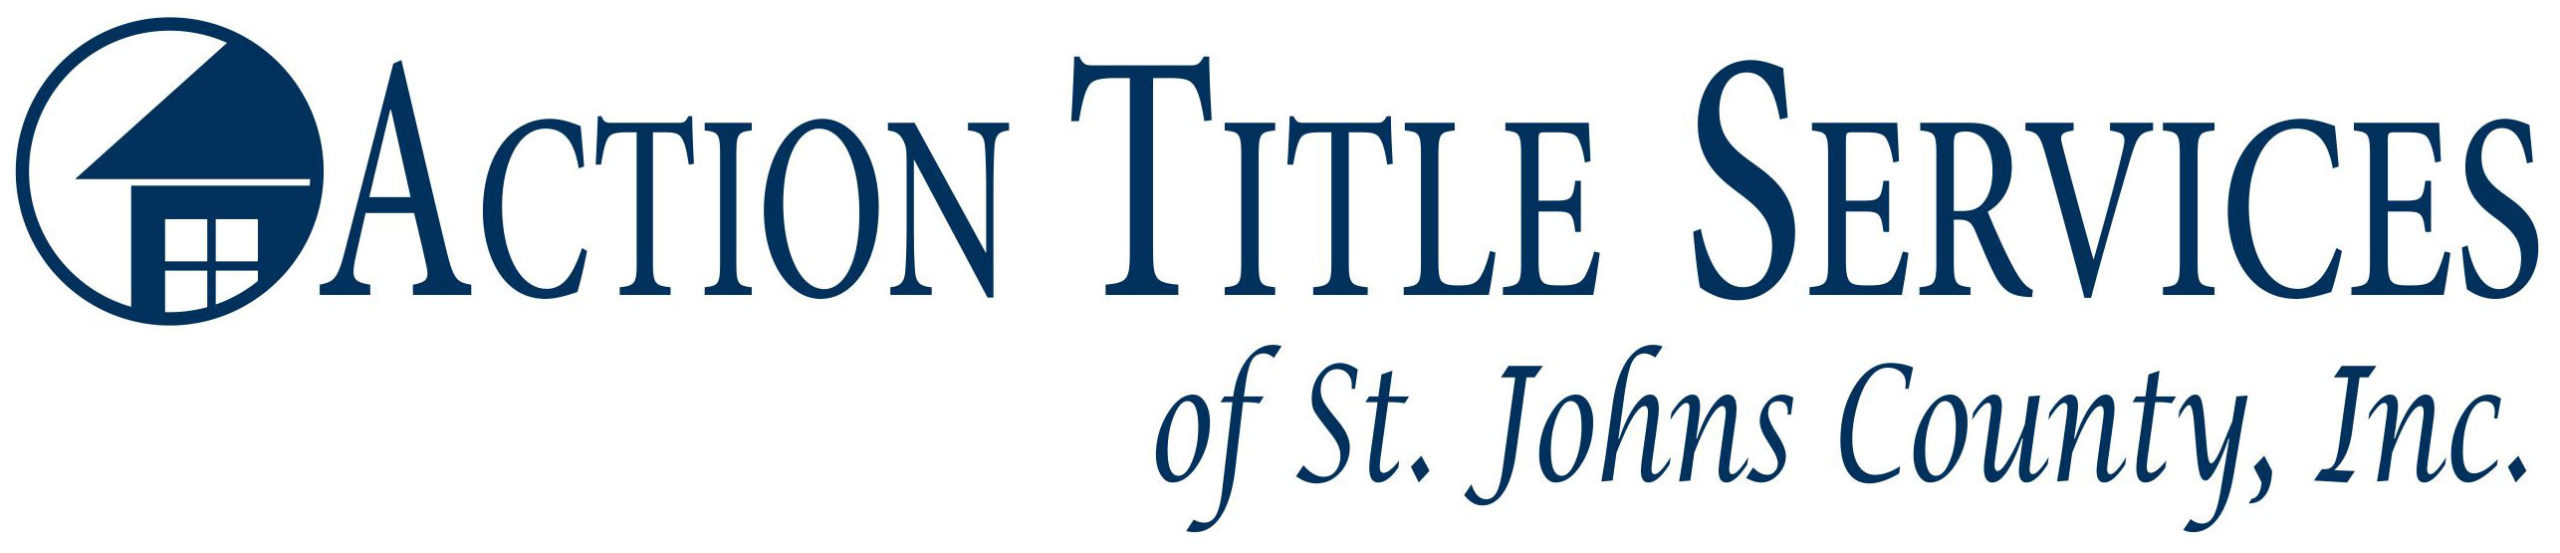 Action Title Services of St. Johns County, Inc.